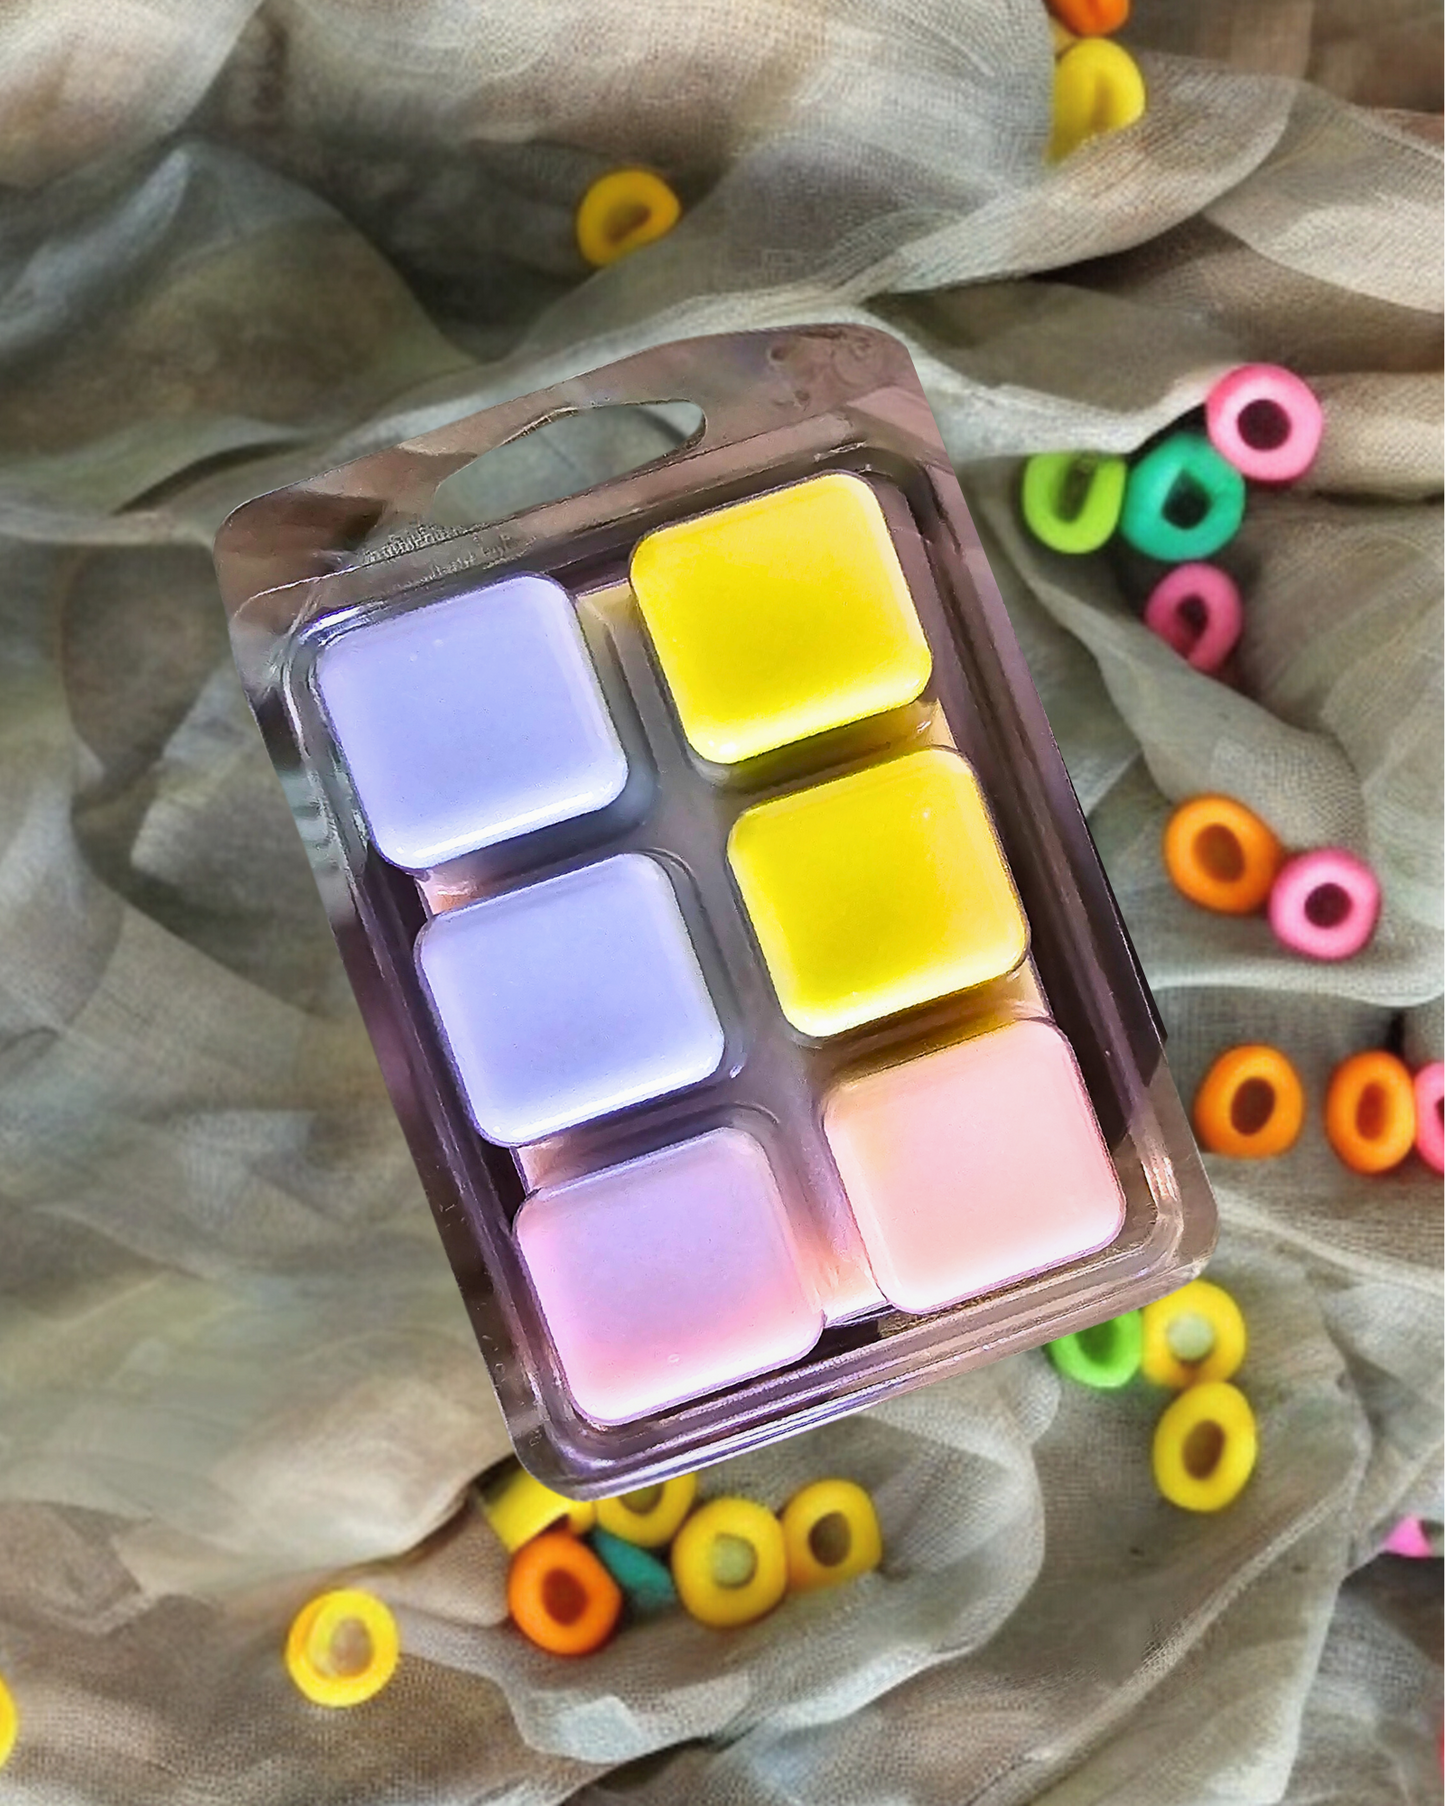 Relive Your Childhood with Fruity Loops Soy Wax Melts. The delightful blend of lemon, cake, and berries will take you back to the nostalgic sweet aroma of carefree Saturday mornings. This wax melt is perfect for anyone who wants to tap into their inner child.   Size: 2.5 oz (75 g)  Fruity Loops Soy Wax Melts is hand poured with love in Alberta, Canada. It is made with 100% natural soy wax and premium fragrances that are paraben free and phthalate free fragrance. 